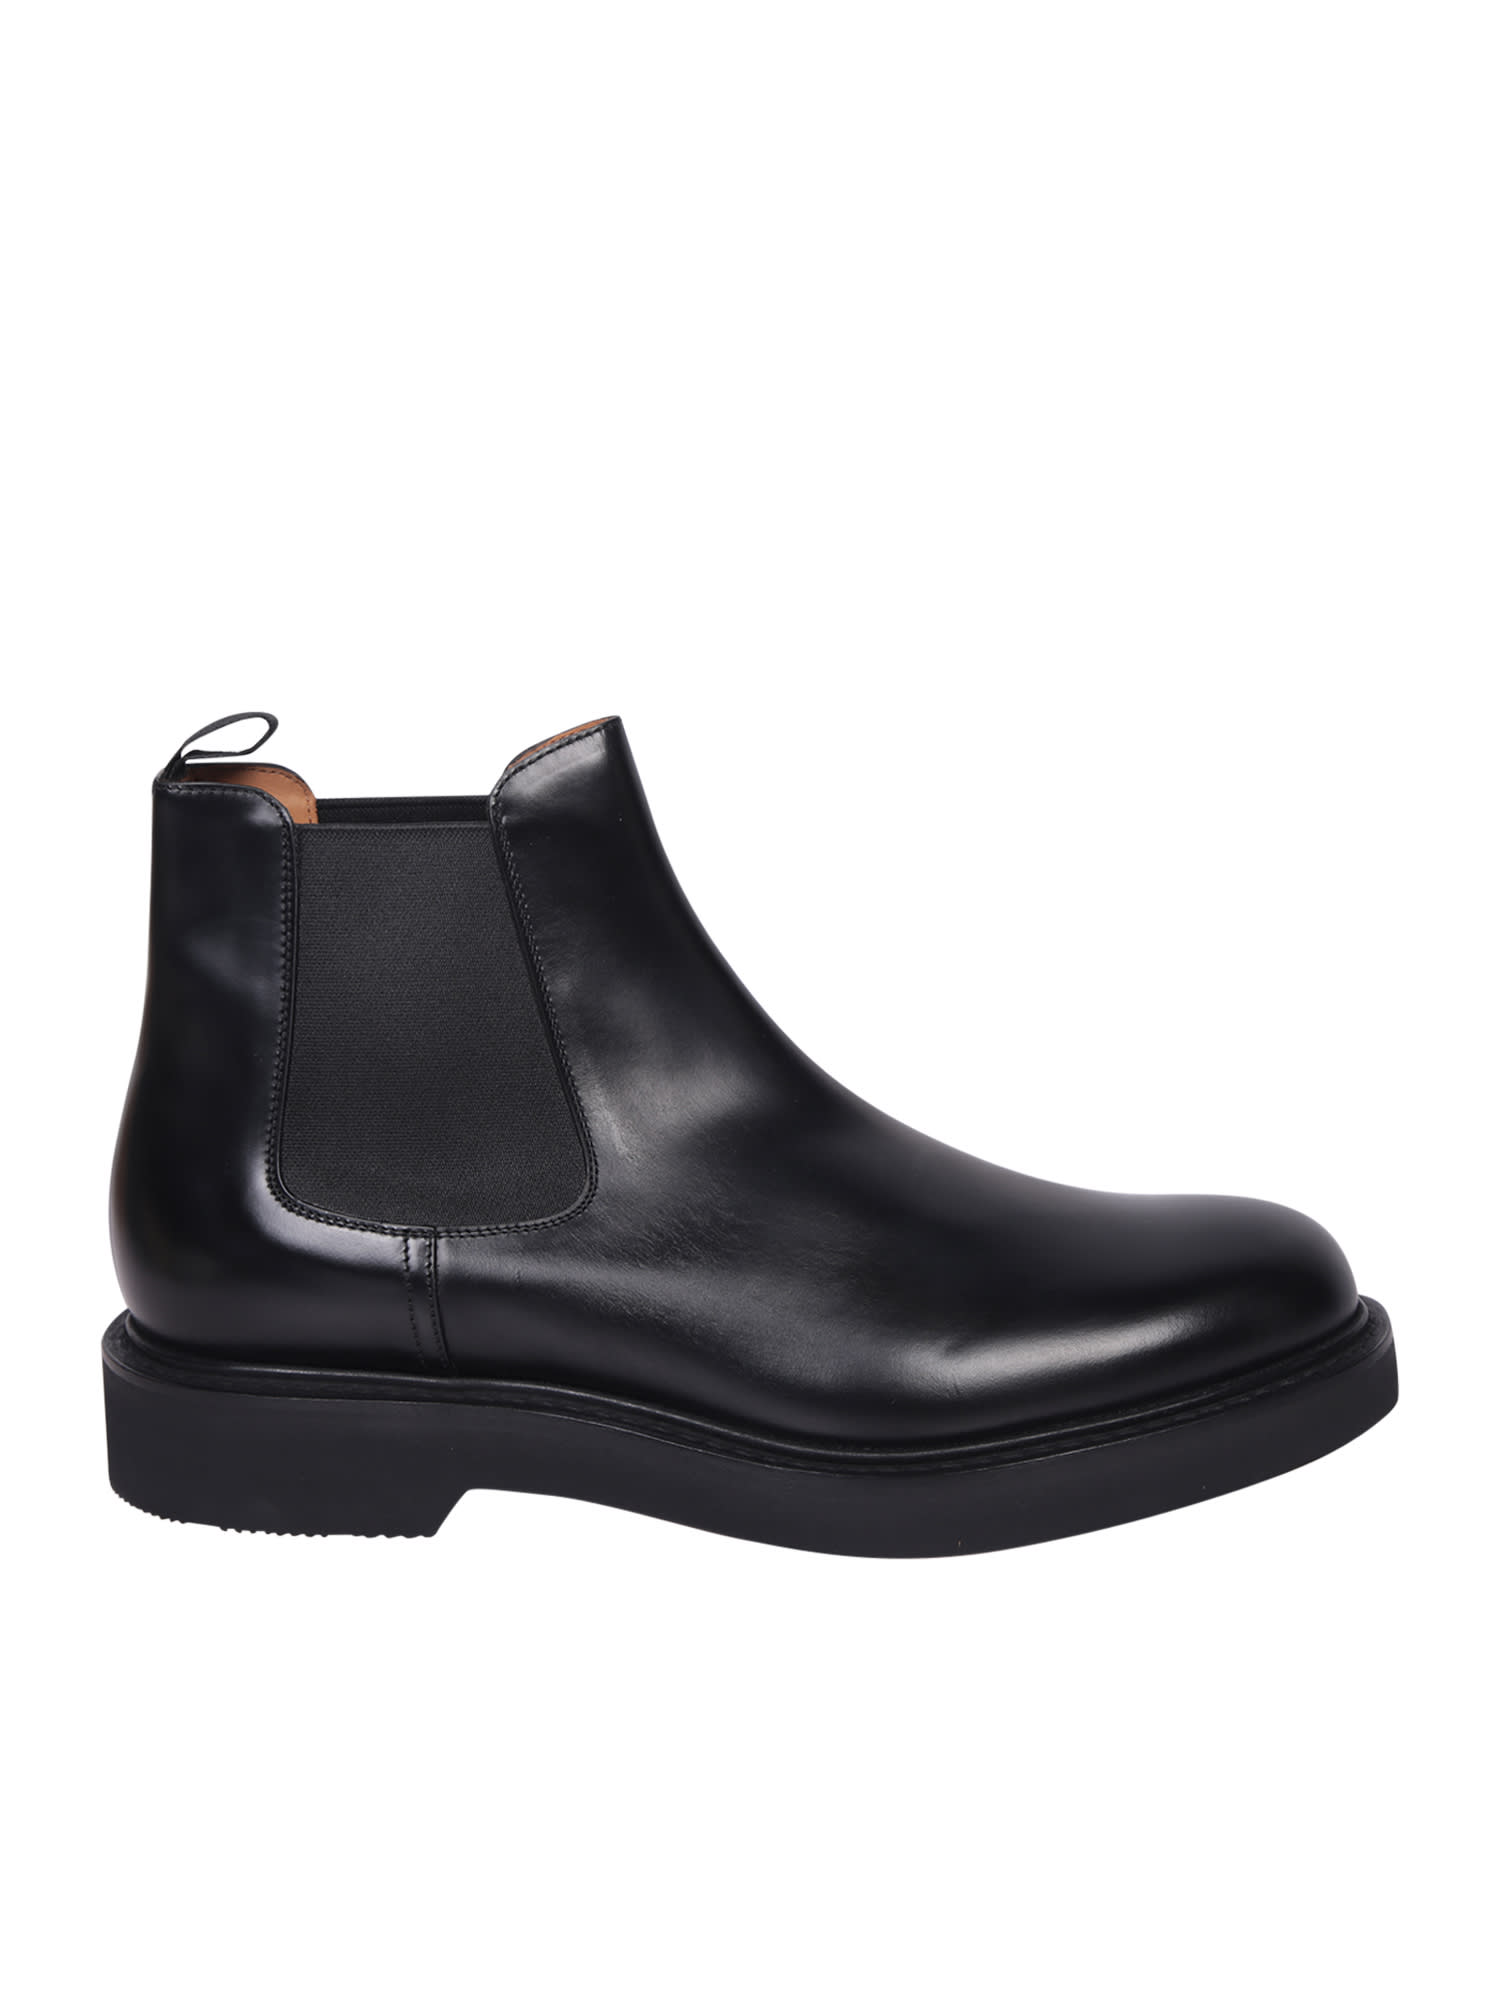 Shop Church's Leicester Black Loafer